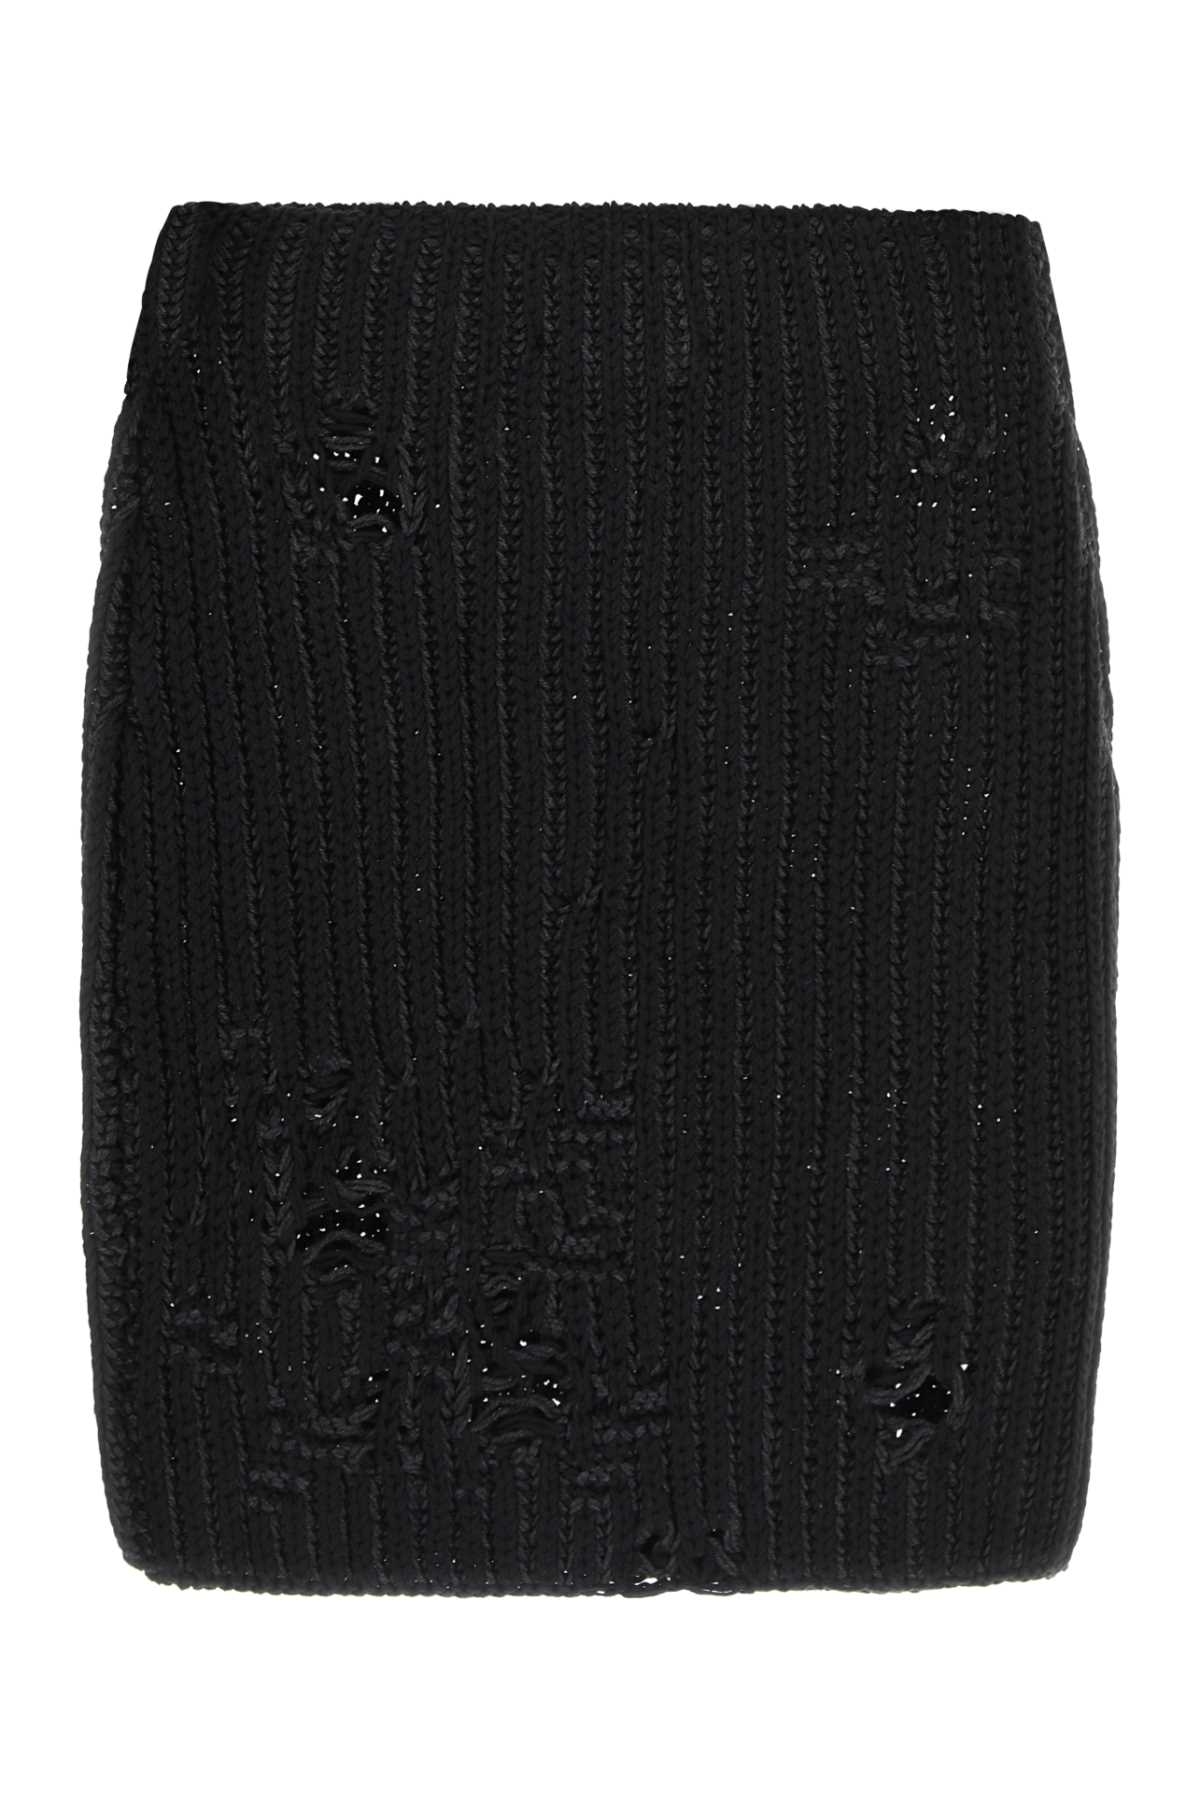 Jw Anderson Black Cotton And Acrylic Mini Skirt In 999